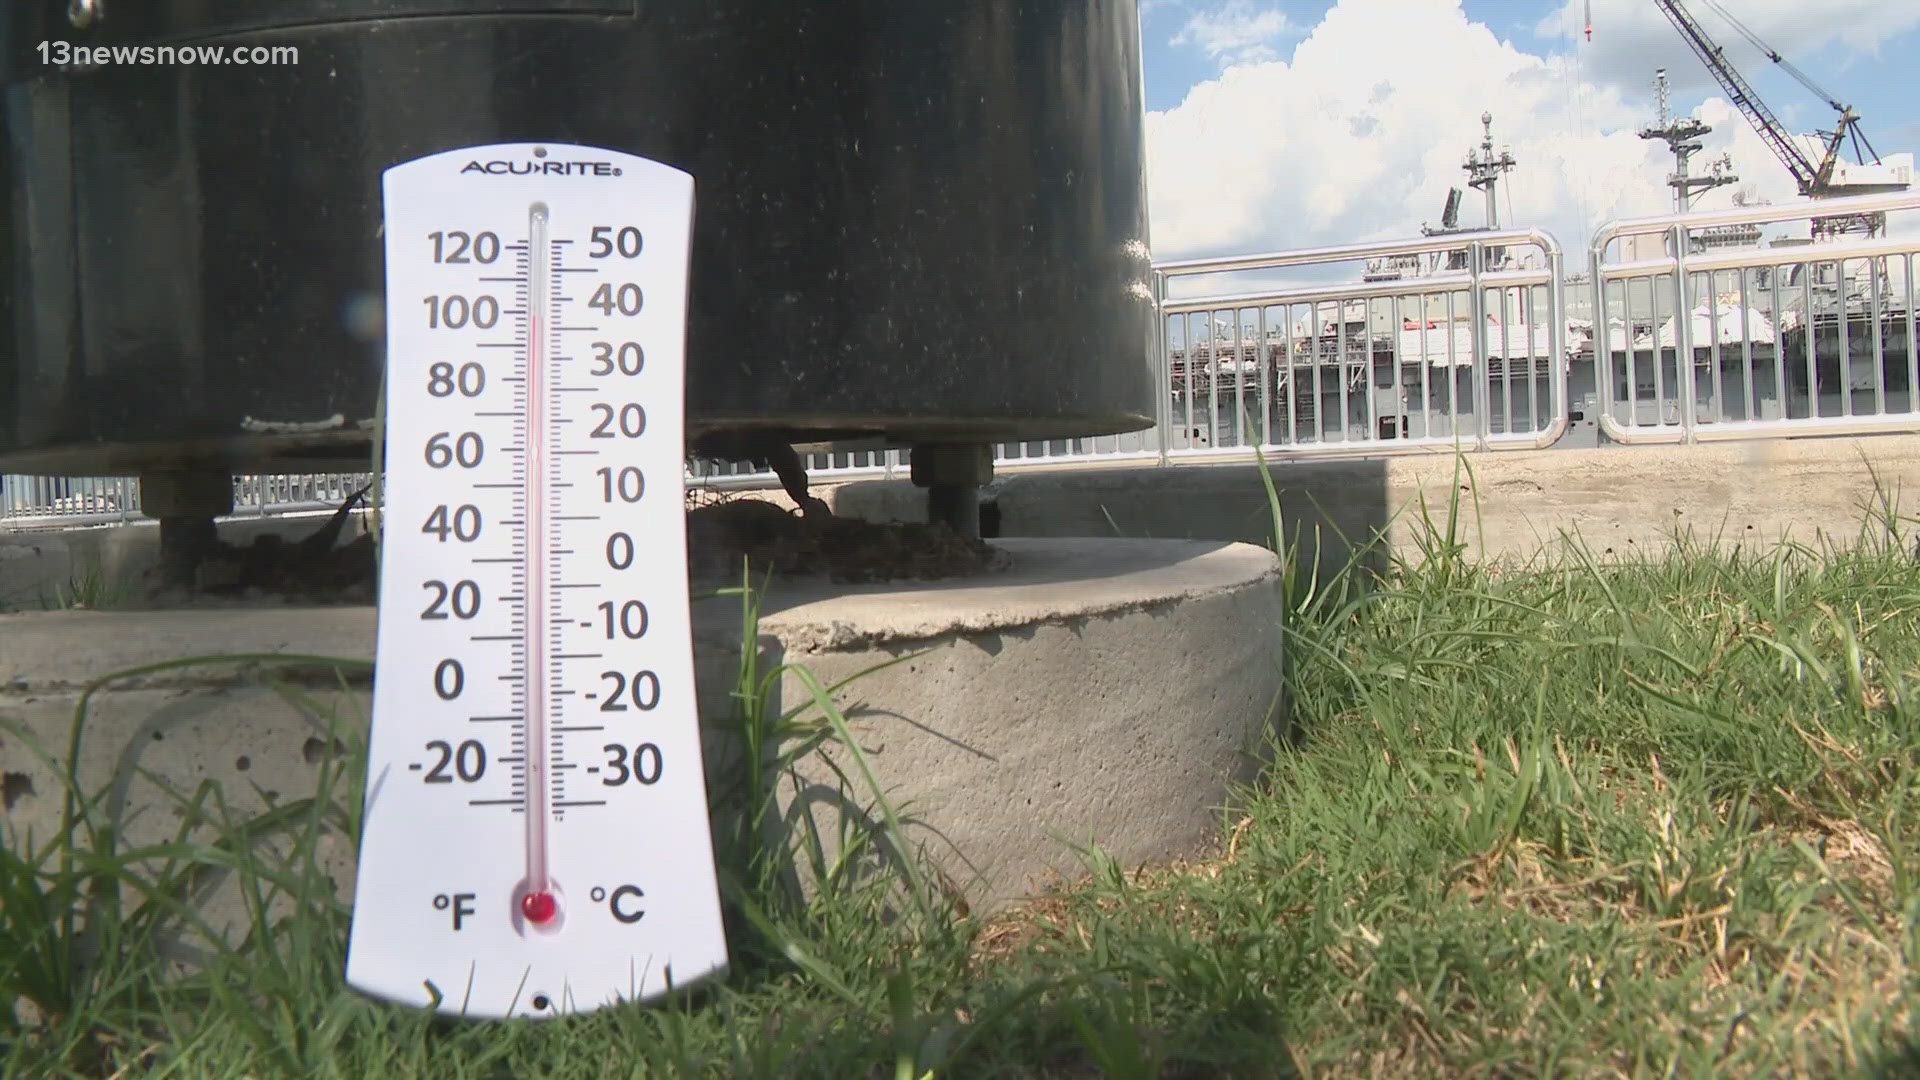 Old Dominion University Professor Dr. Hans-Peter Plag says we're feeling the effects of climate change, especially regarding the heat.